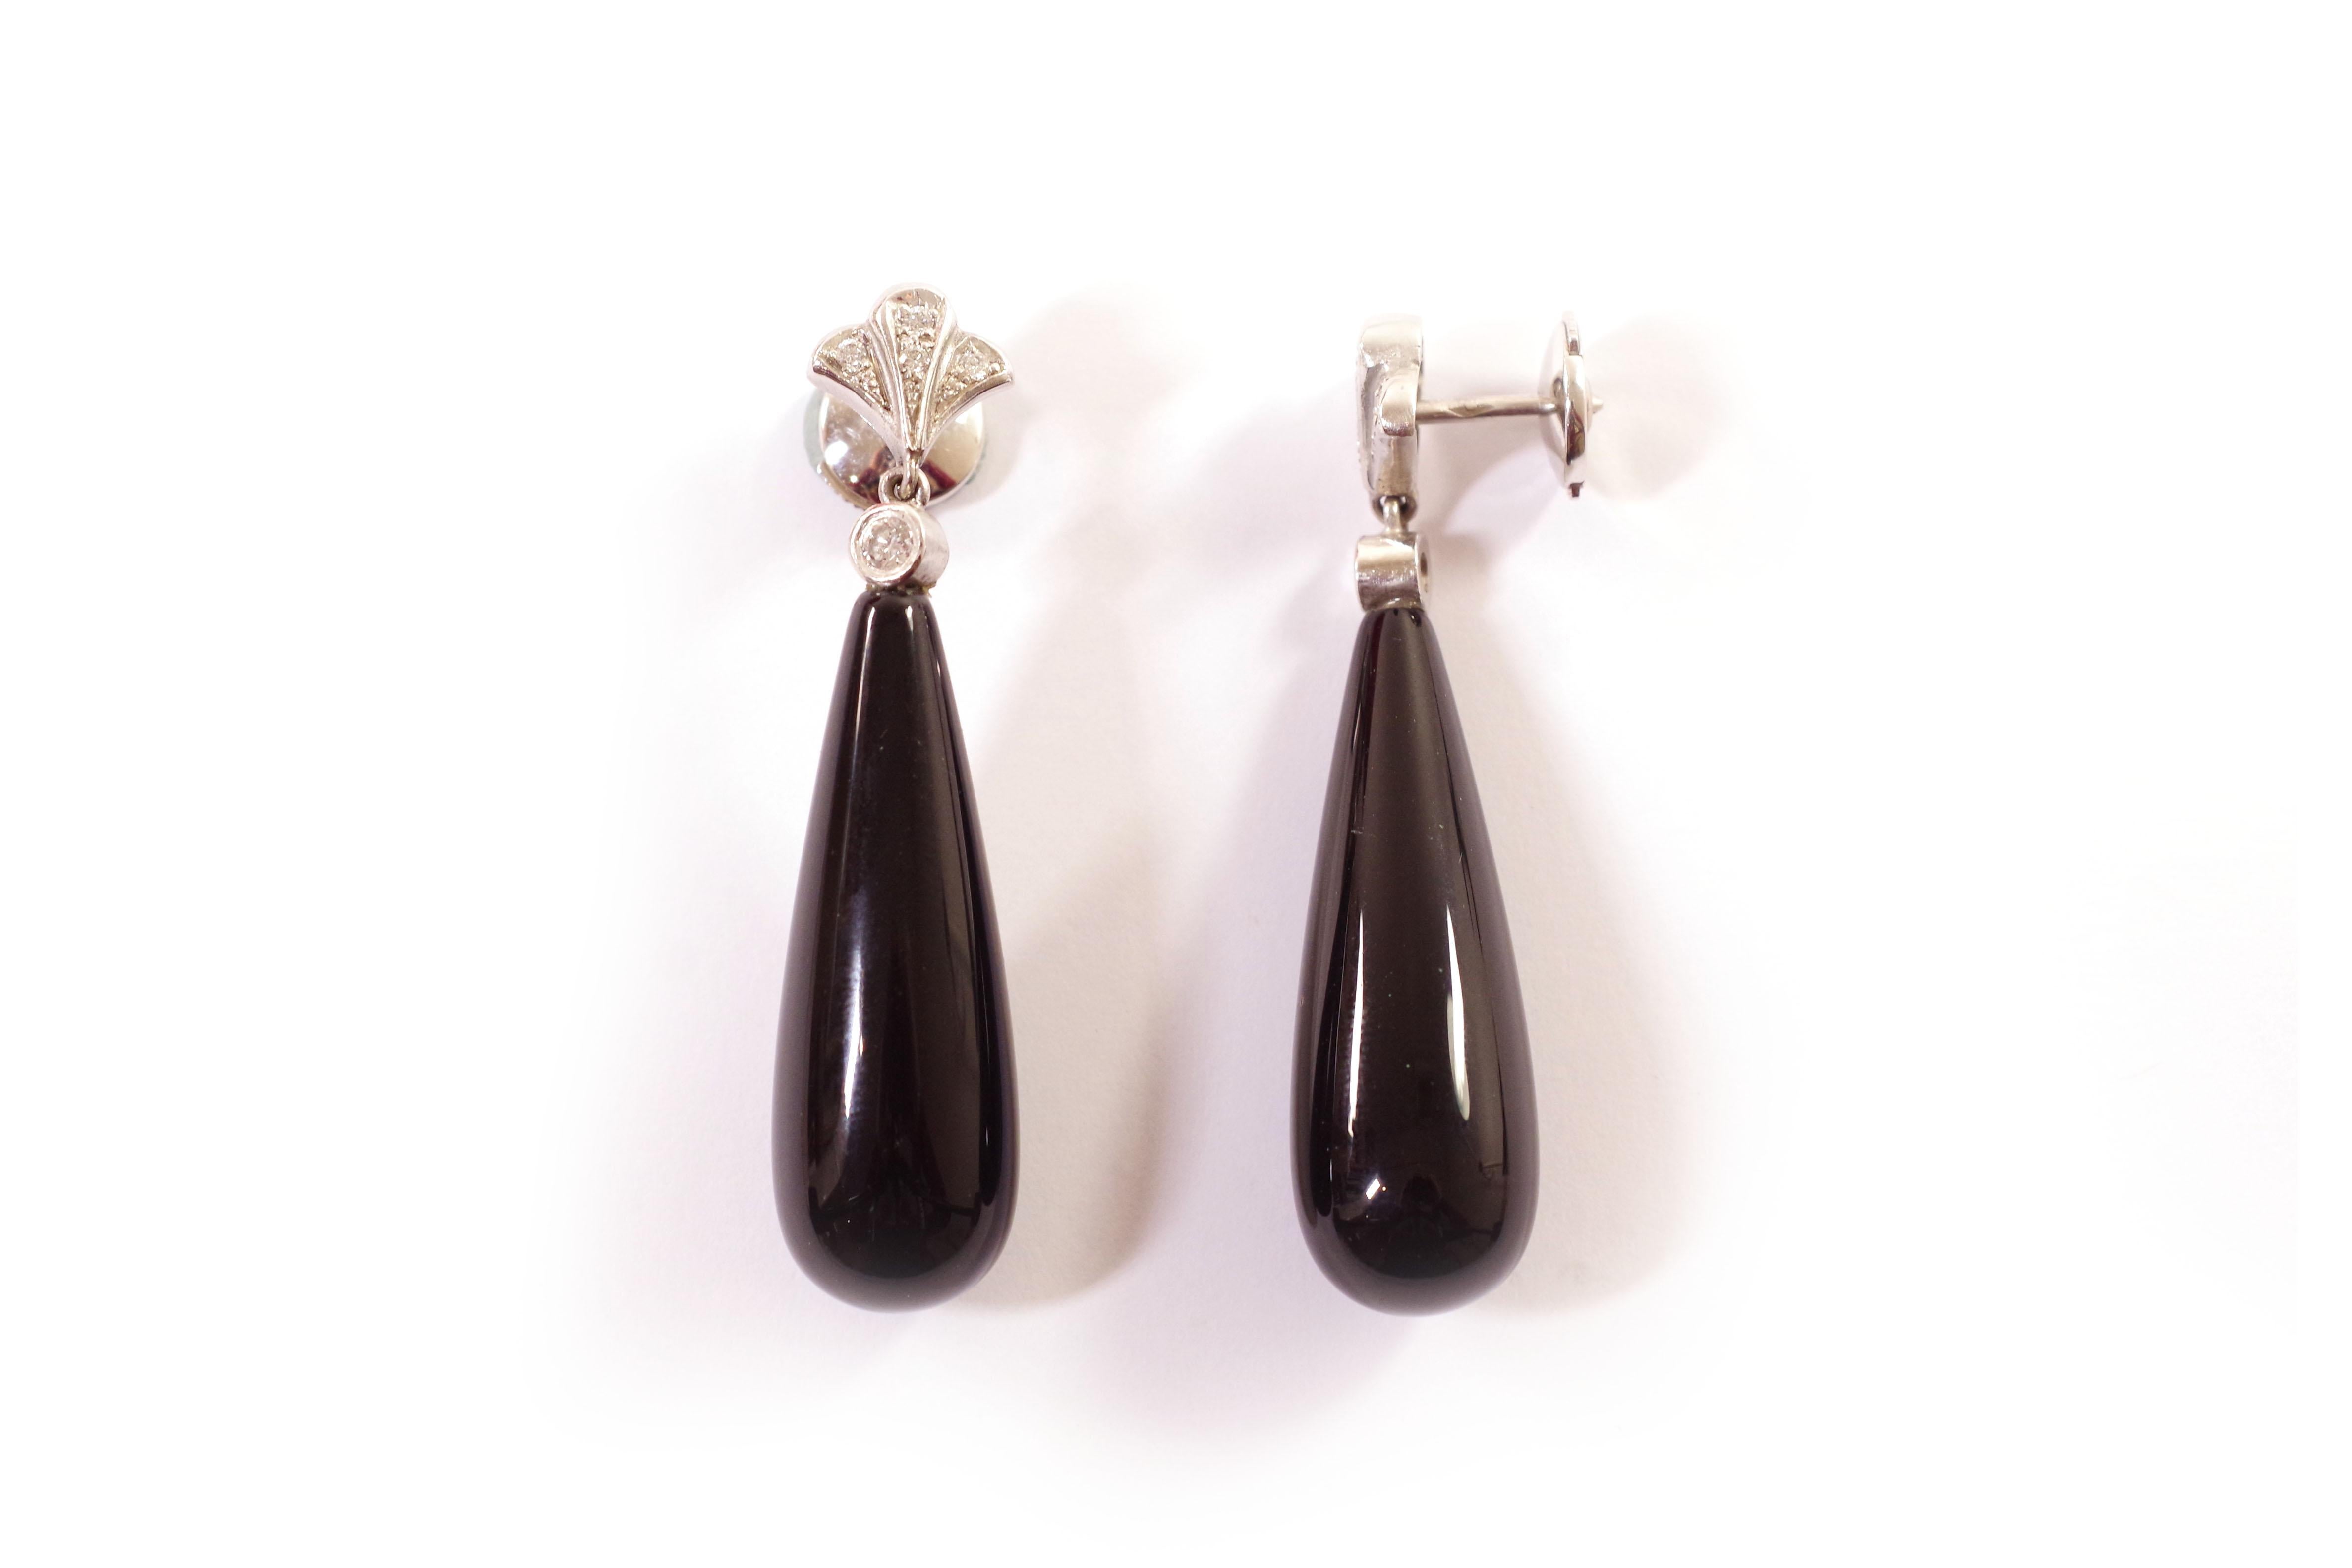 Onyx Art Deco style earrings in white gold 18 karats. Pair of long earrings, each of which is decorated with a large onyx drop topped by a brilliant-cut diamond and an Art Deco motif in white gold set with four diamonds. Pair of earrings, French, in